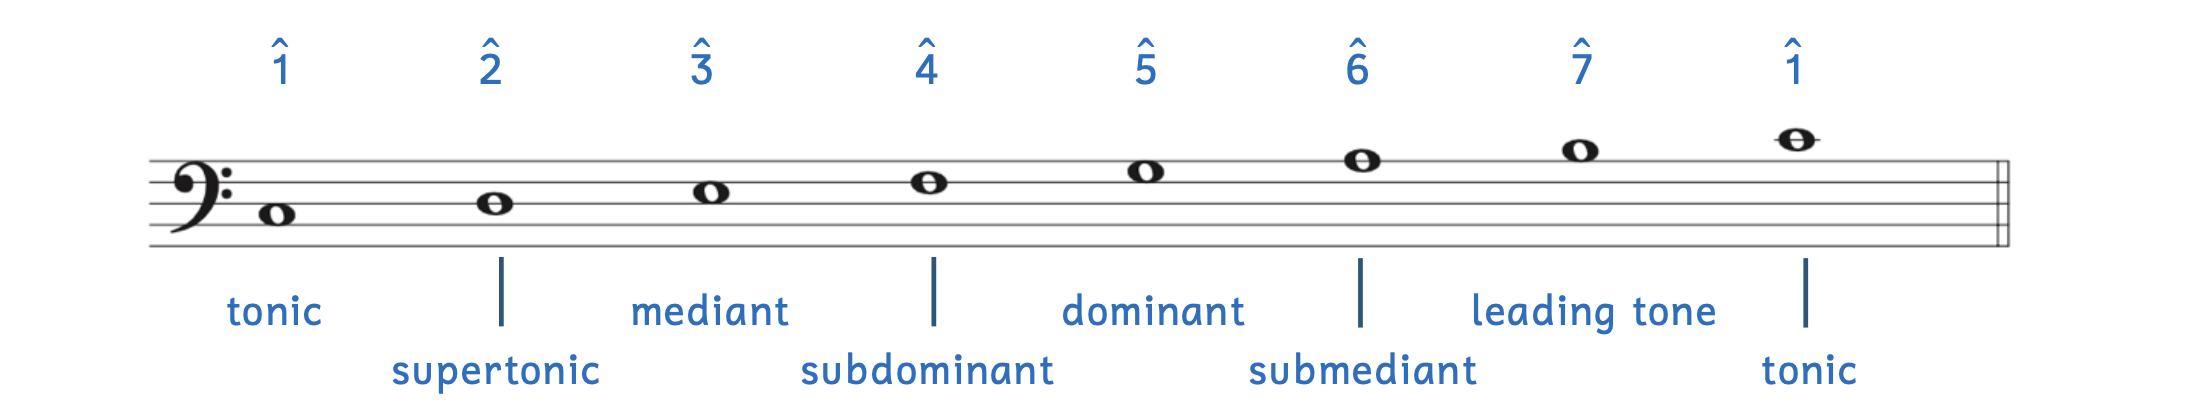 Scale degree names and numbers in a major scale. Scale degree 1 is the tonic. Scale degree 2 is the supertonic. Scale degree 3 is the mediant. Scale degree 4 is the subdominant. Scale degree 5 is the dominant. Scale degree 6 is the submediant. Scale degree 7 is the leading tone.